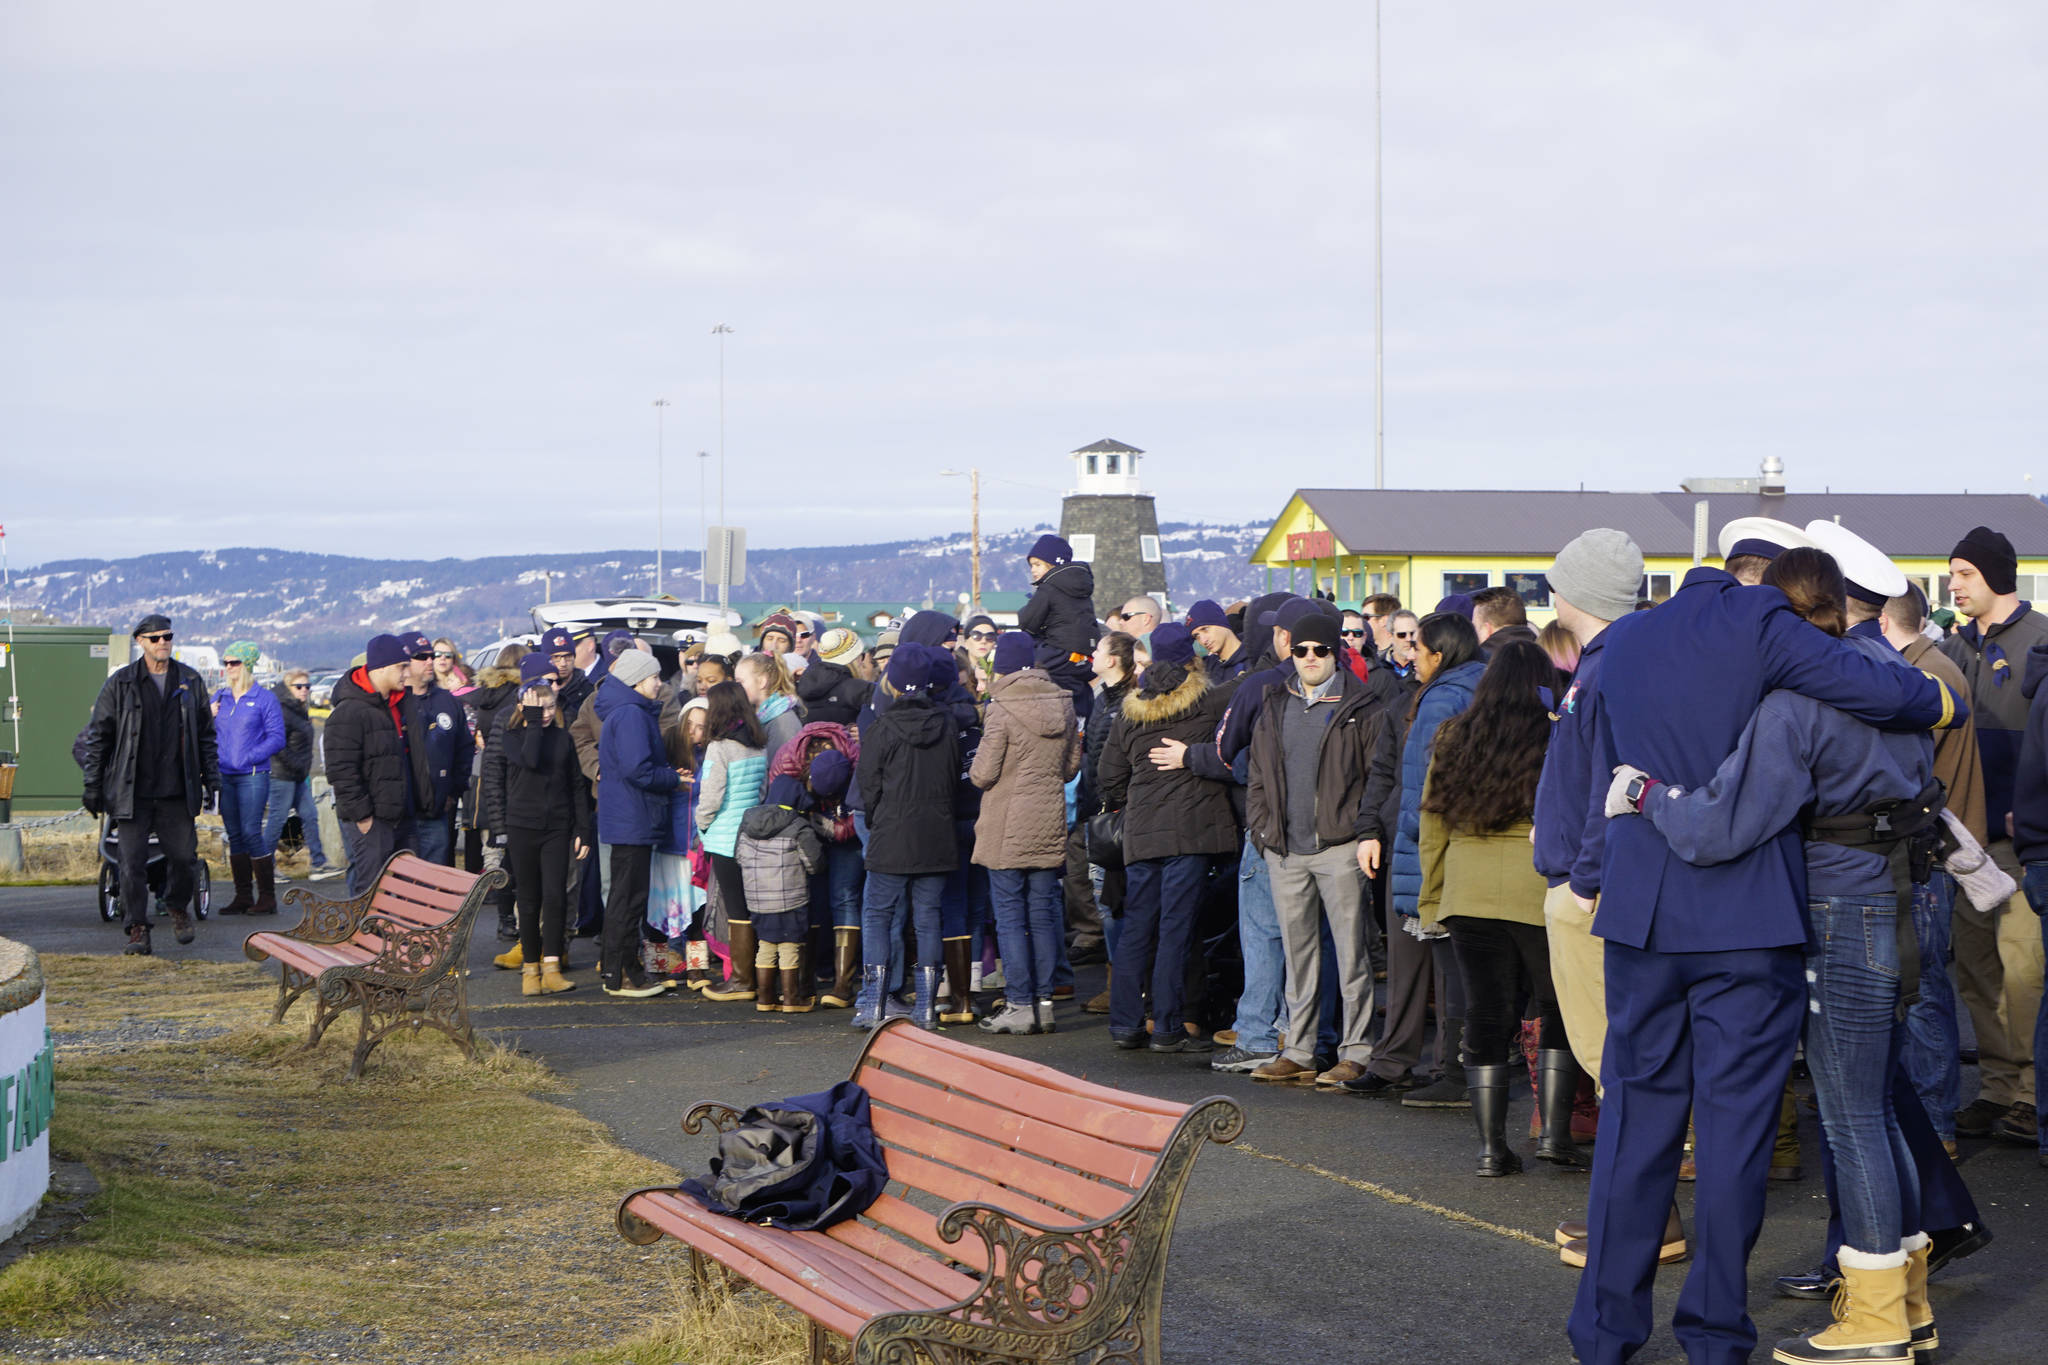 Friends and crew mates of Chief Warrant Officer Michael Kozloski meet after a memorial service for him on Friday morning, Feb. 8, 2019, at the Seafarer’s Memorial on the Homer Spit, Homer, Alaska. (Photo by Michael Armstrong/Homer News)